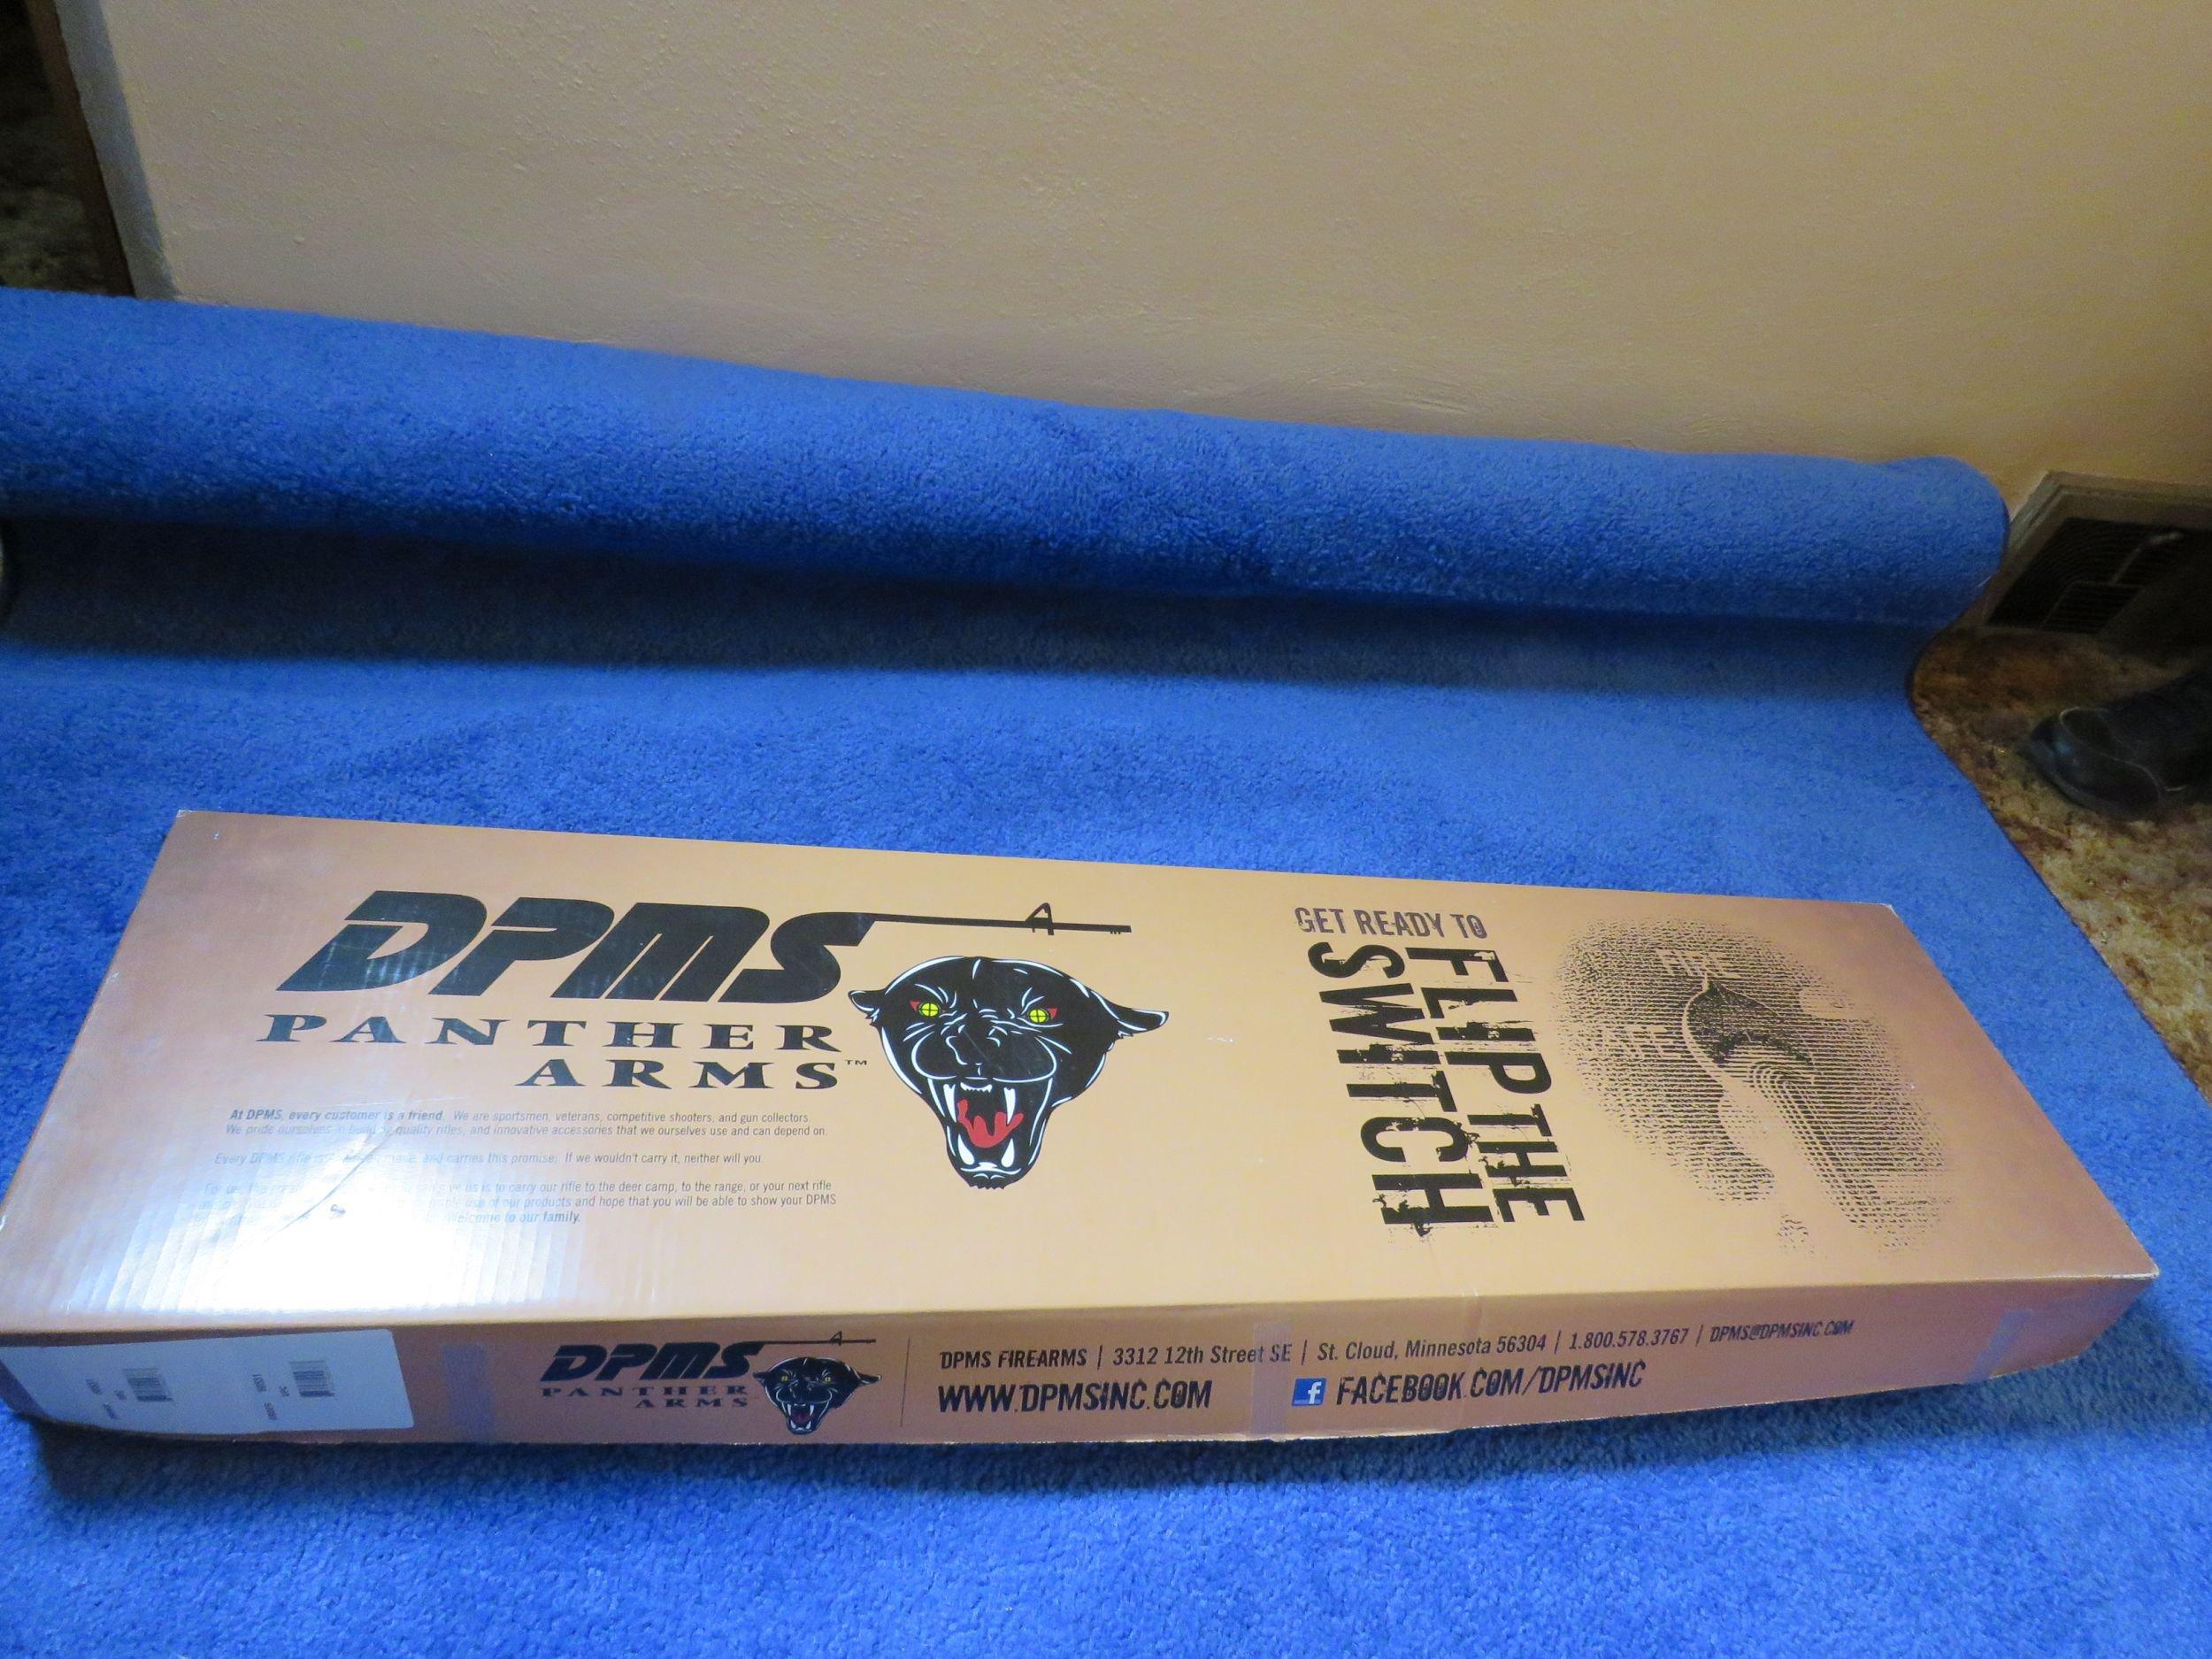 DPMS Panther Arms Model A-15 Type Semi-Automatic Sporting Rifle NIB NF  FFH068974